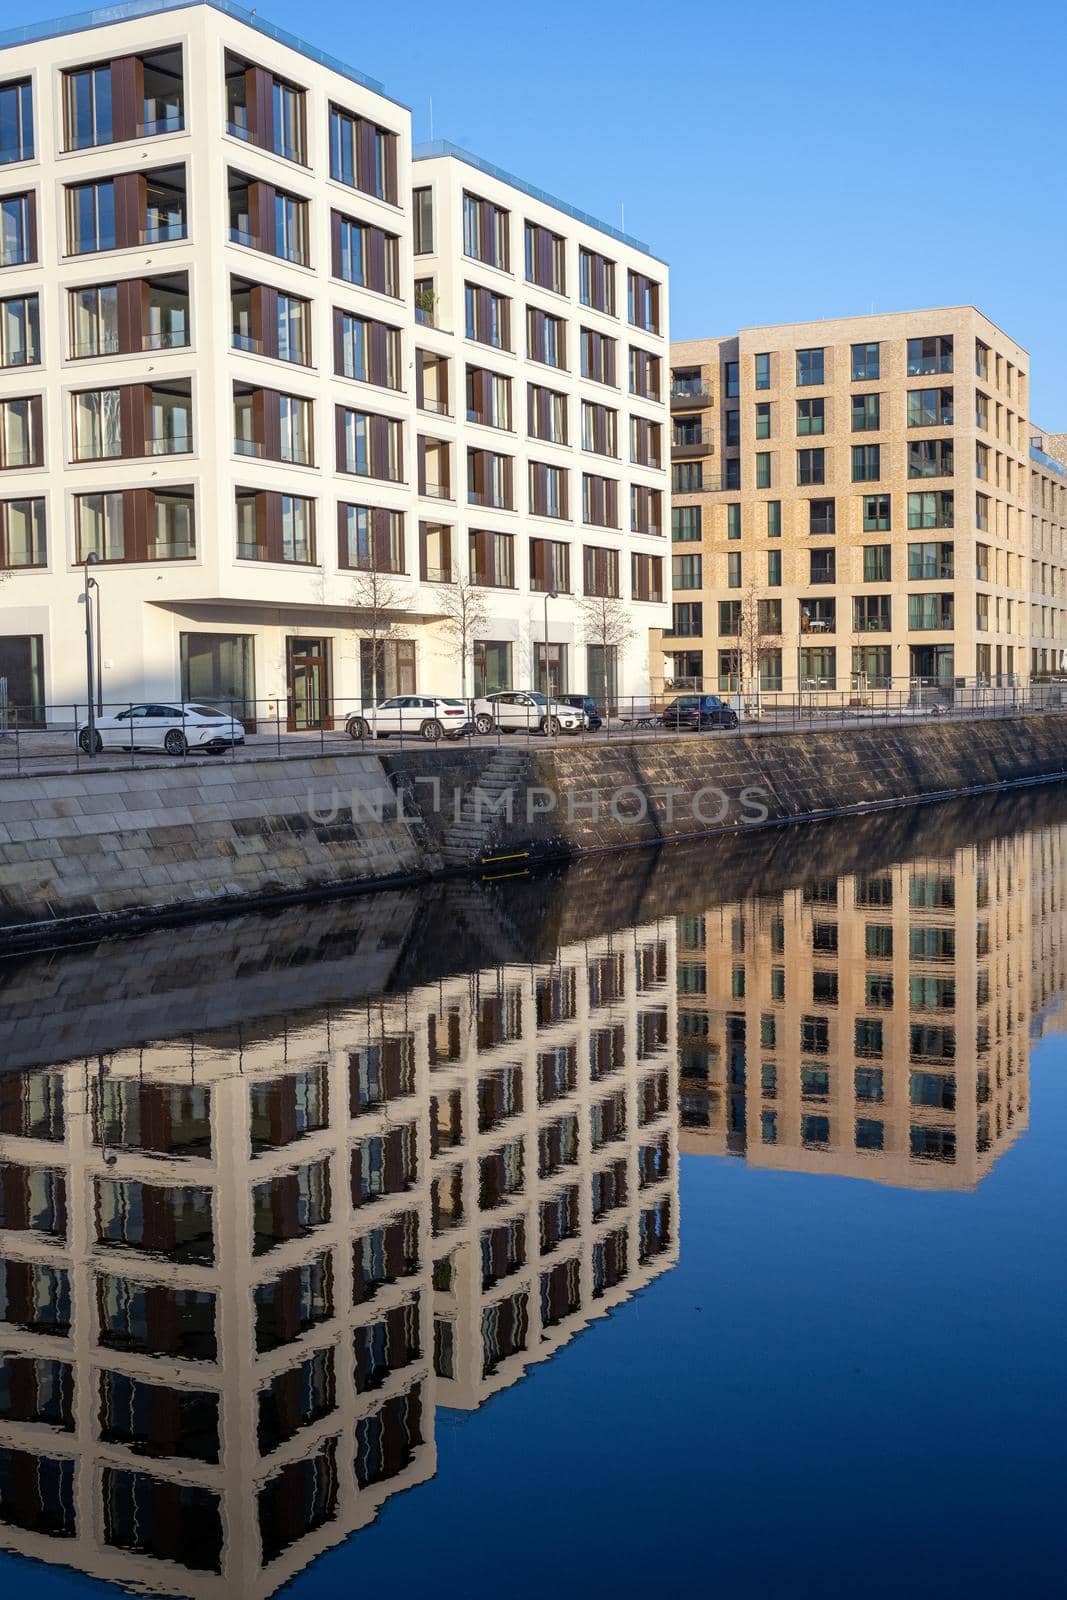 New apartment buildings reflected in a small canal seen in Berlin, Germany